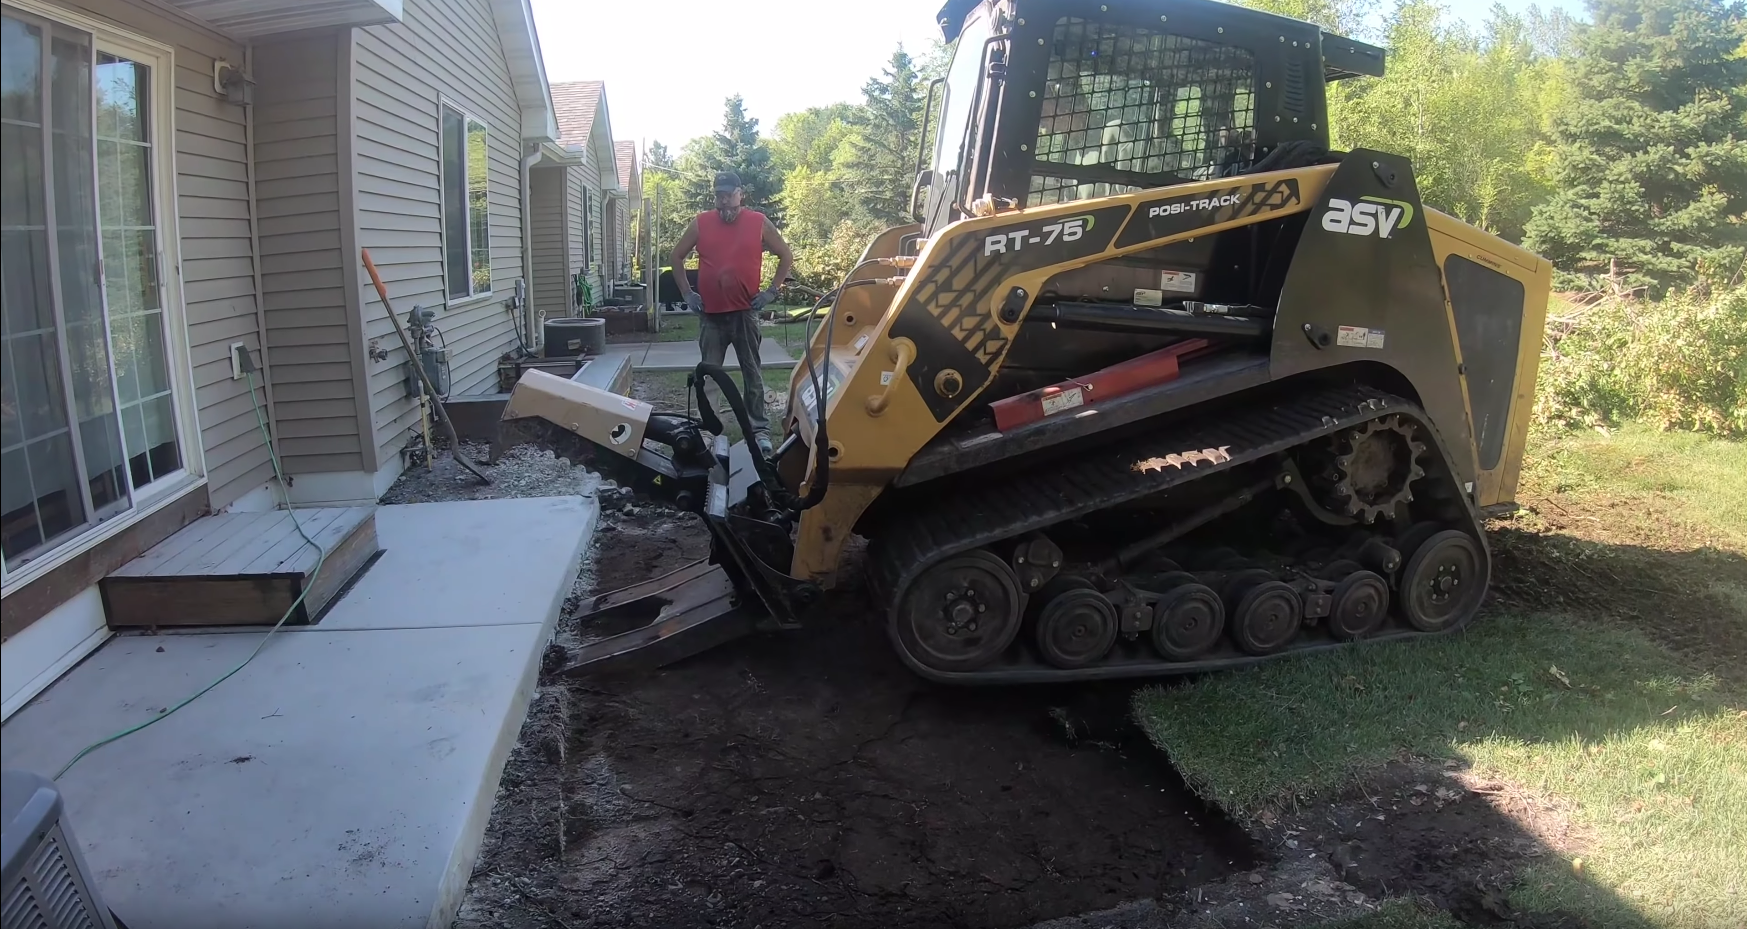 Featured image for “The Beak Skid Steer Attachment – Everything was wrong about this job site. Every basement in the complex was flooding.”